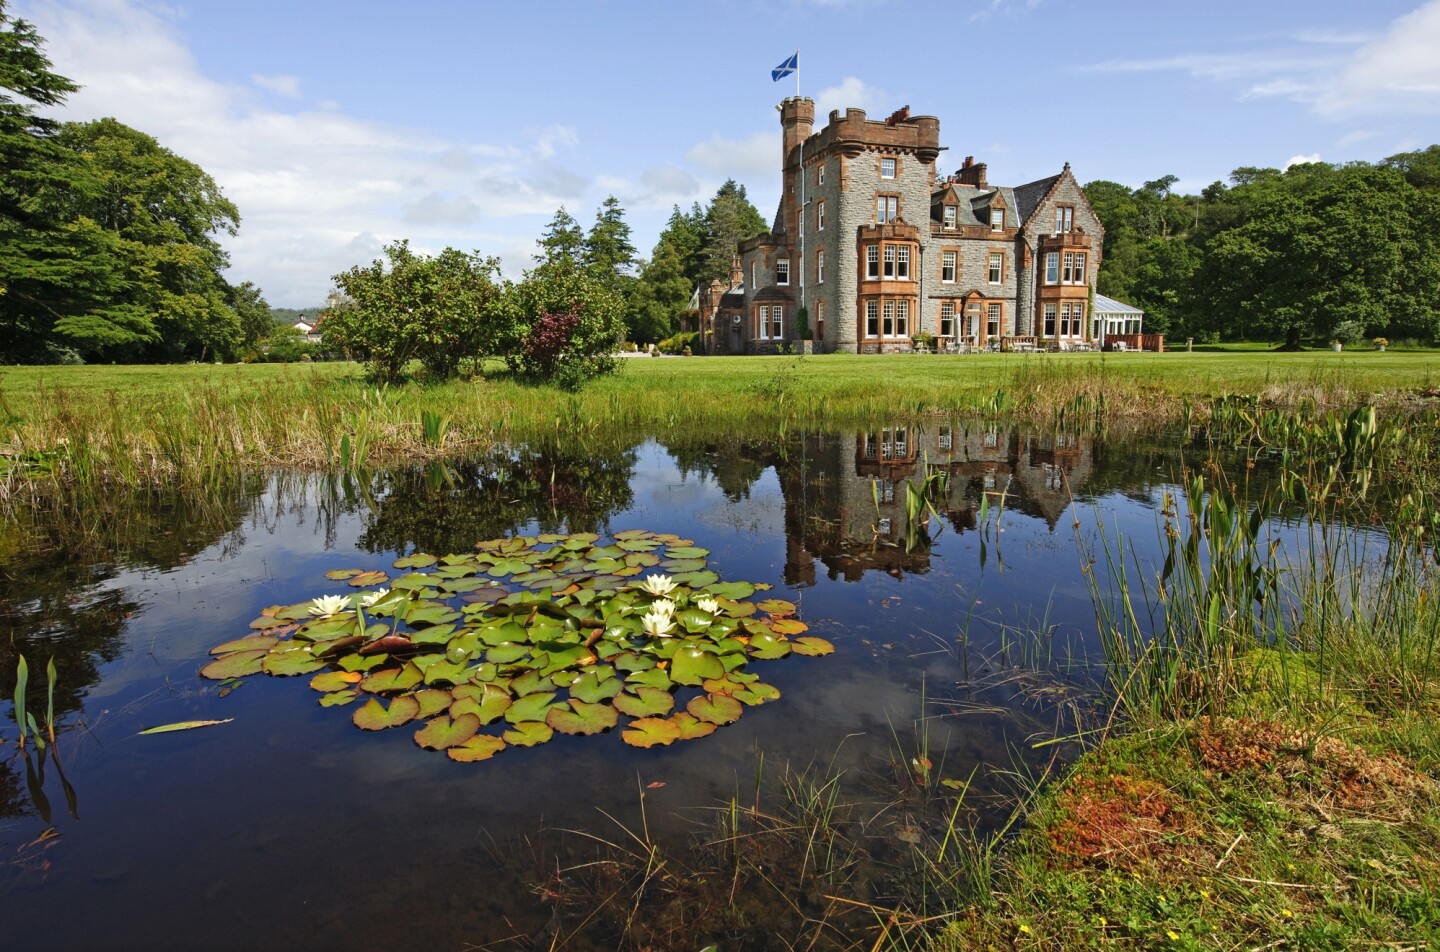 <h2>Isle of Eriska, Scotland</h2> <ul>   <li><b>Location: </b>Loch Creran, Scotland </li>   <li><b>Why we love it: </b>Wildlife including roe deer and otters, whisky and gin tasting, many outdoor activities</li>   <li><a class="Link" href="https://www.eriska-hotel.co.uk" rel="noopener"><b>Book now</b></a> </li>  </ul> <p>On the Isle of Eriska, a 365-acre private island with a hotel and spa, you’re a 30-minute drive from seaside Oban, but the area feels much more remote, surrounded by the wild beauty of Scottish lakes and mountains with abundant wildlife, including roe deer, seals, otters, golden eagles, and badgers. Step into a pair of Wellingtons (they keep them by the front door) and explore the grounds on foot, or choose to linger over the whisky menu in the main house. The guest rooms and suites are delightfully mismatched, each drawing on the unique architecture of the space, but there are also plenty of options for groups of different sizes, including spa and garden cottages hidden in the historic stables and the six-person Arnott’s House. While on the property, you can take part in such activities as archery, axe-throwing, falconry, beekeeping, fishing, golfing, and much more. </p>